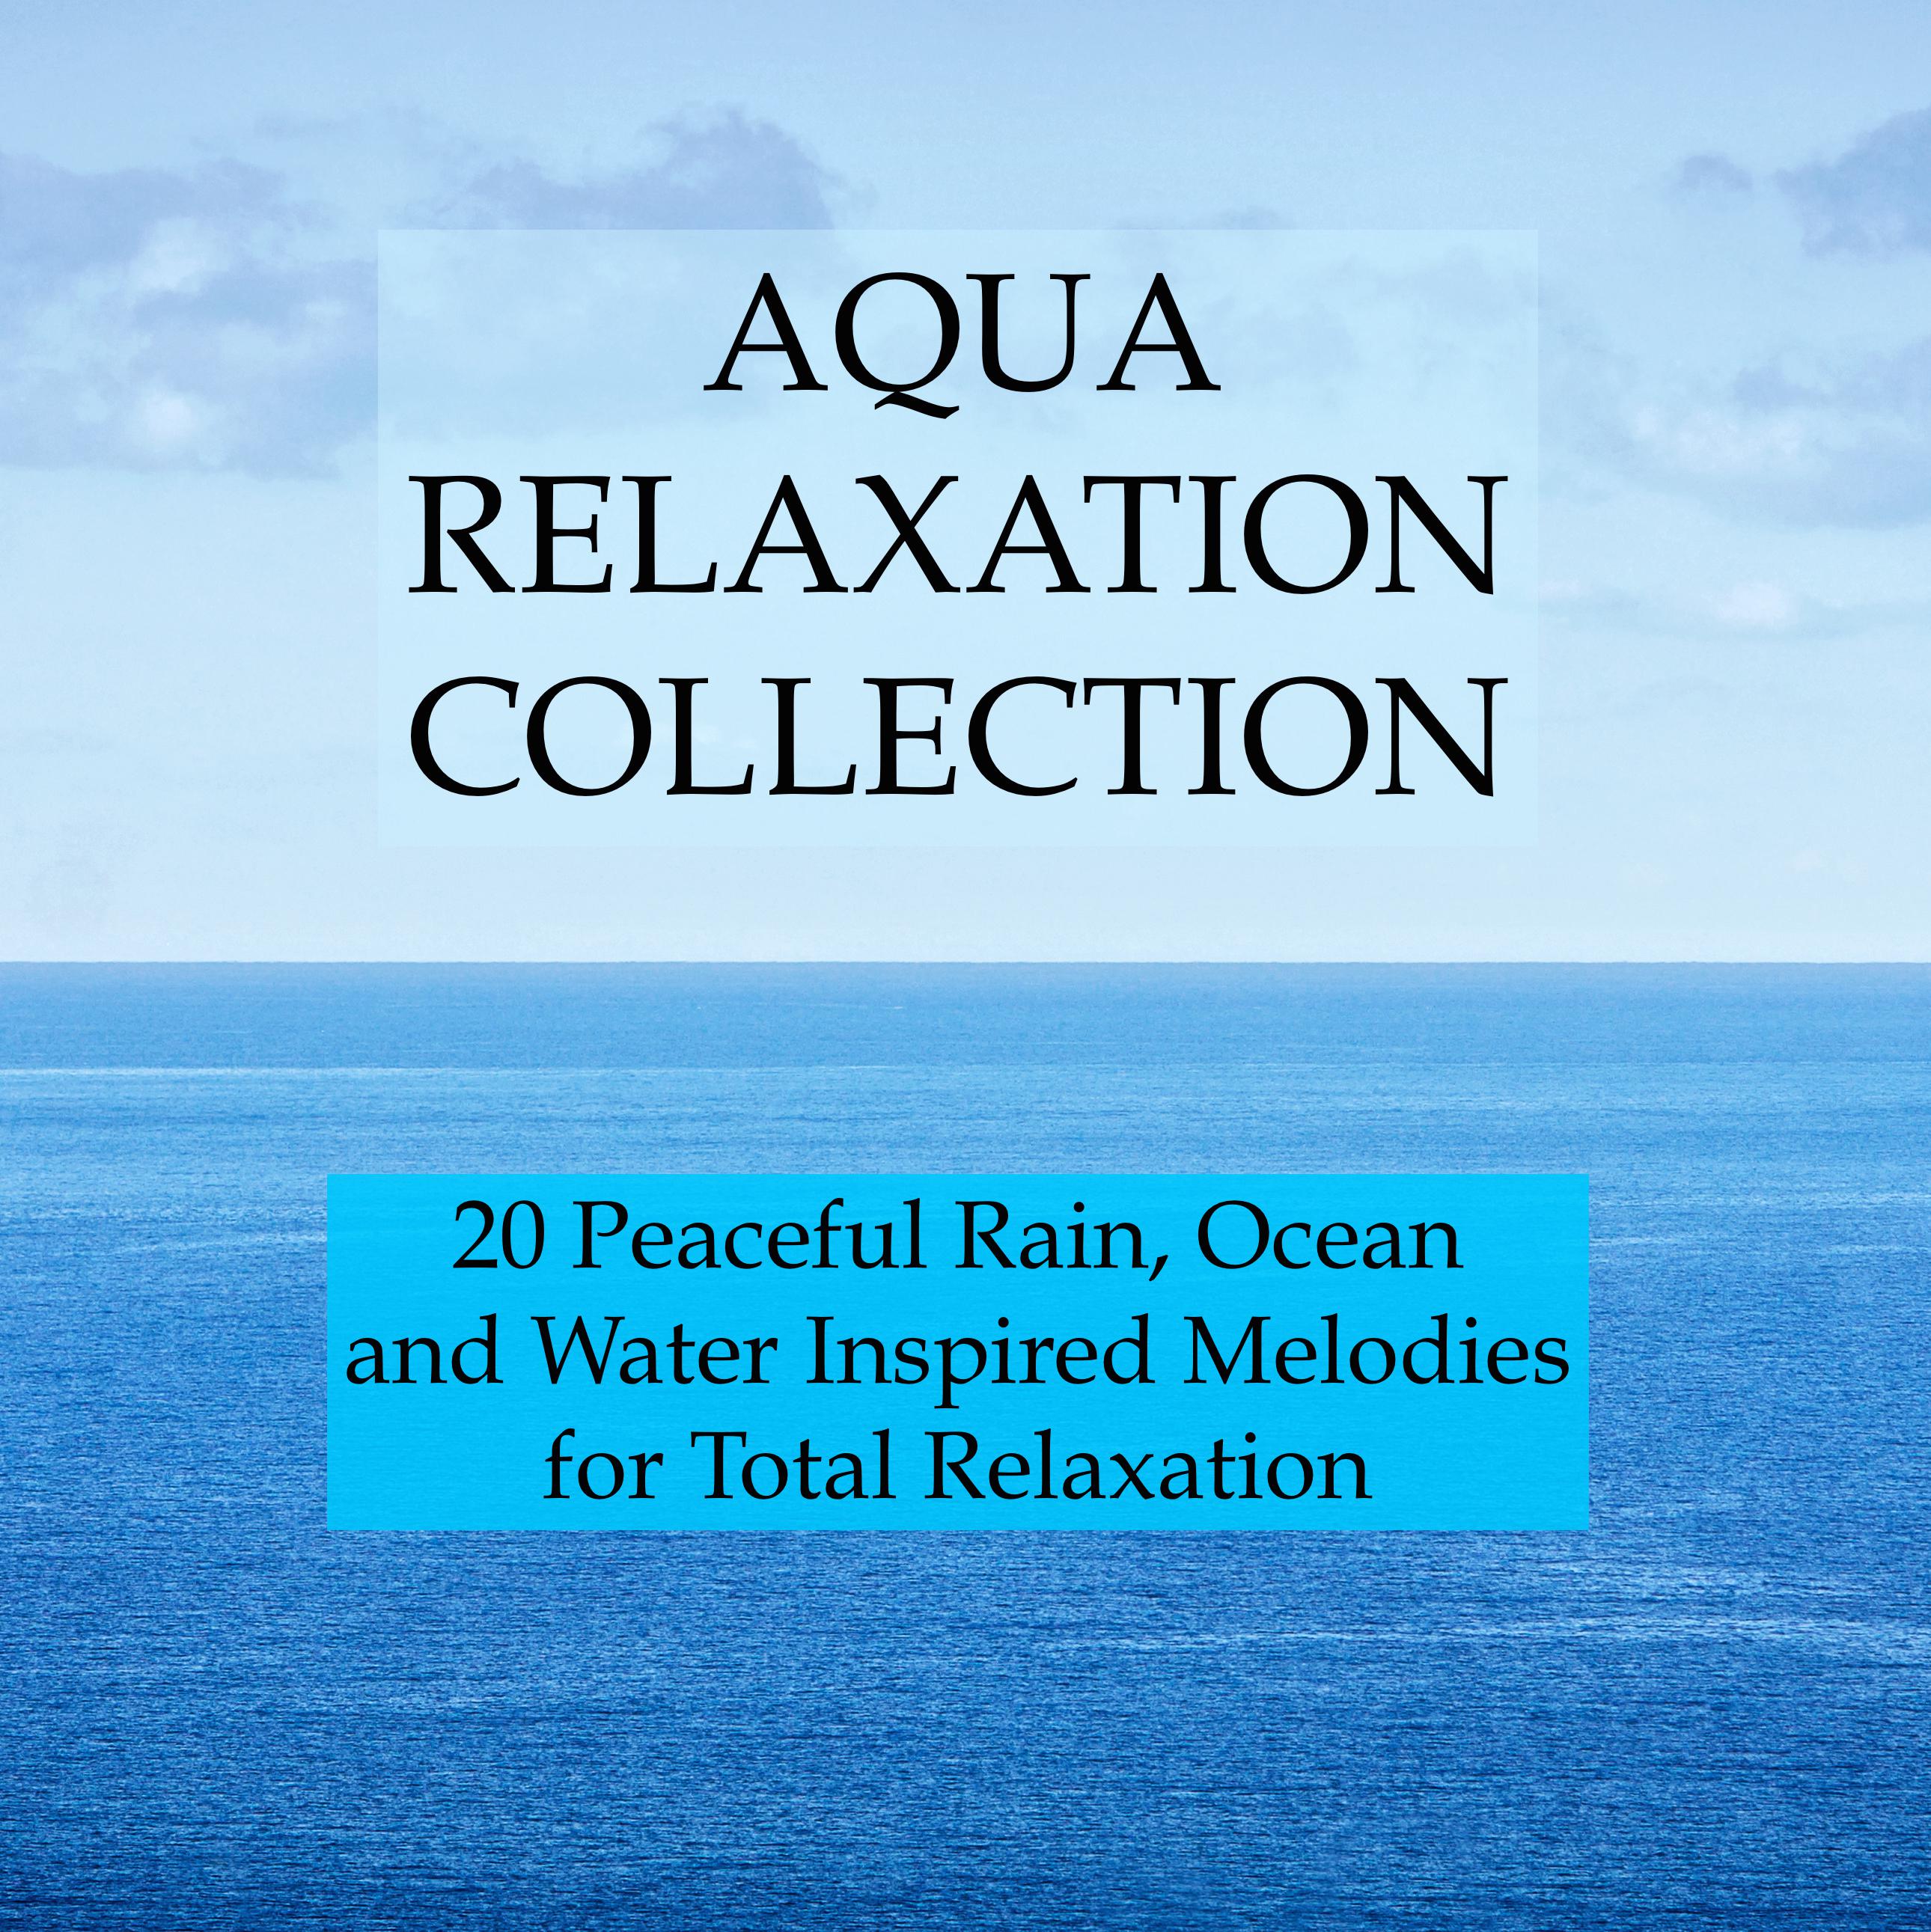 Aqua Relaxation Collection - 20 Peaceful Rain, Ocean and Water Inspired Melodies for Total Relaxation, Stress & Anxiety Relief,  Deeper Sleep and Better Mental Health